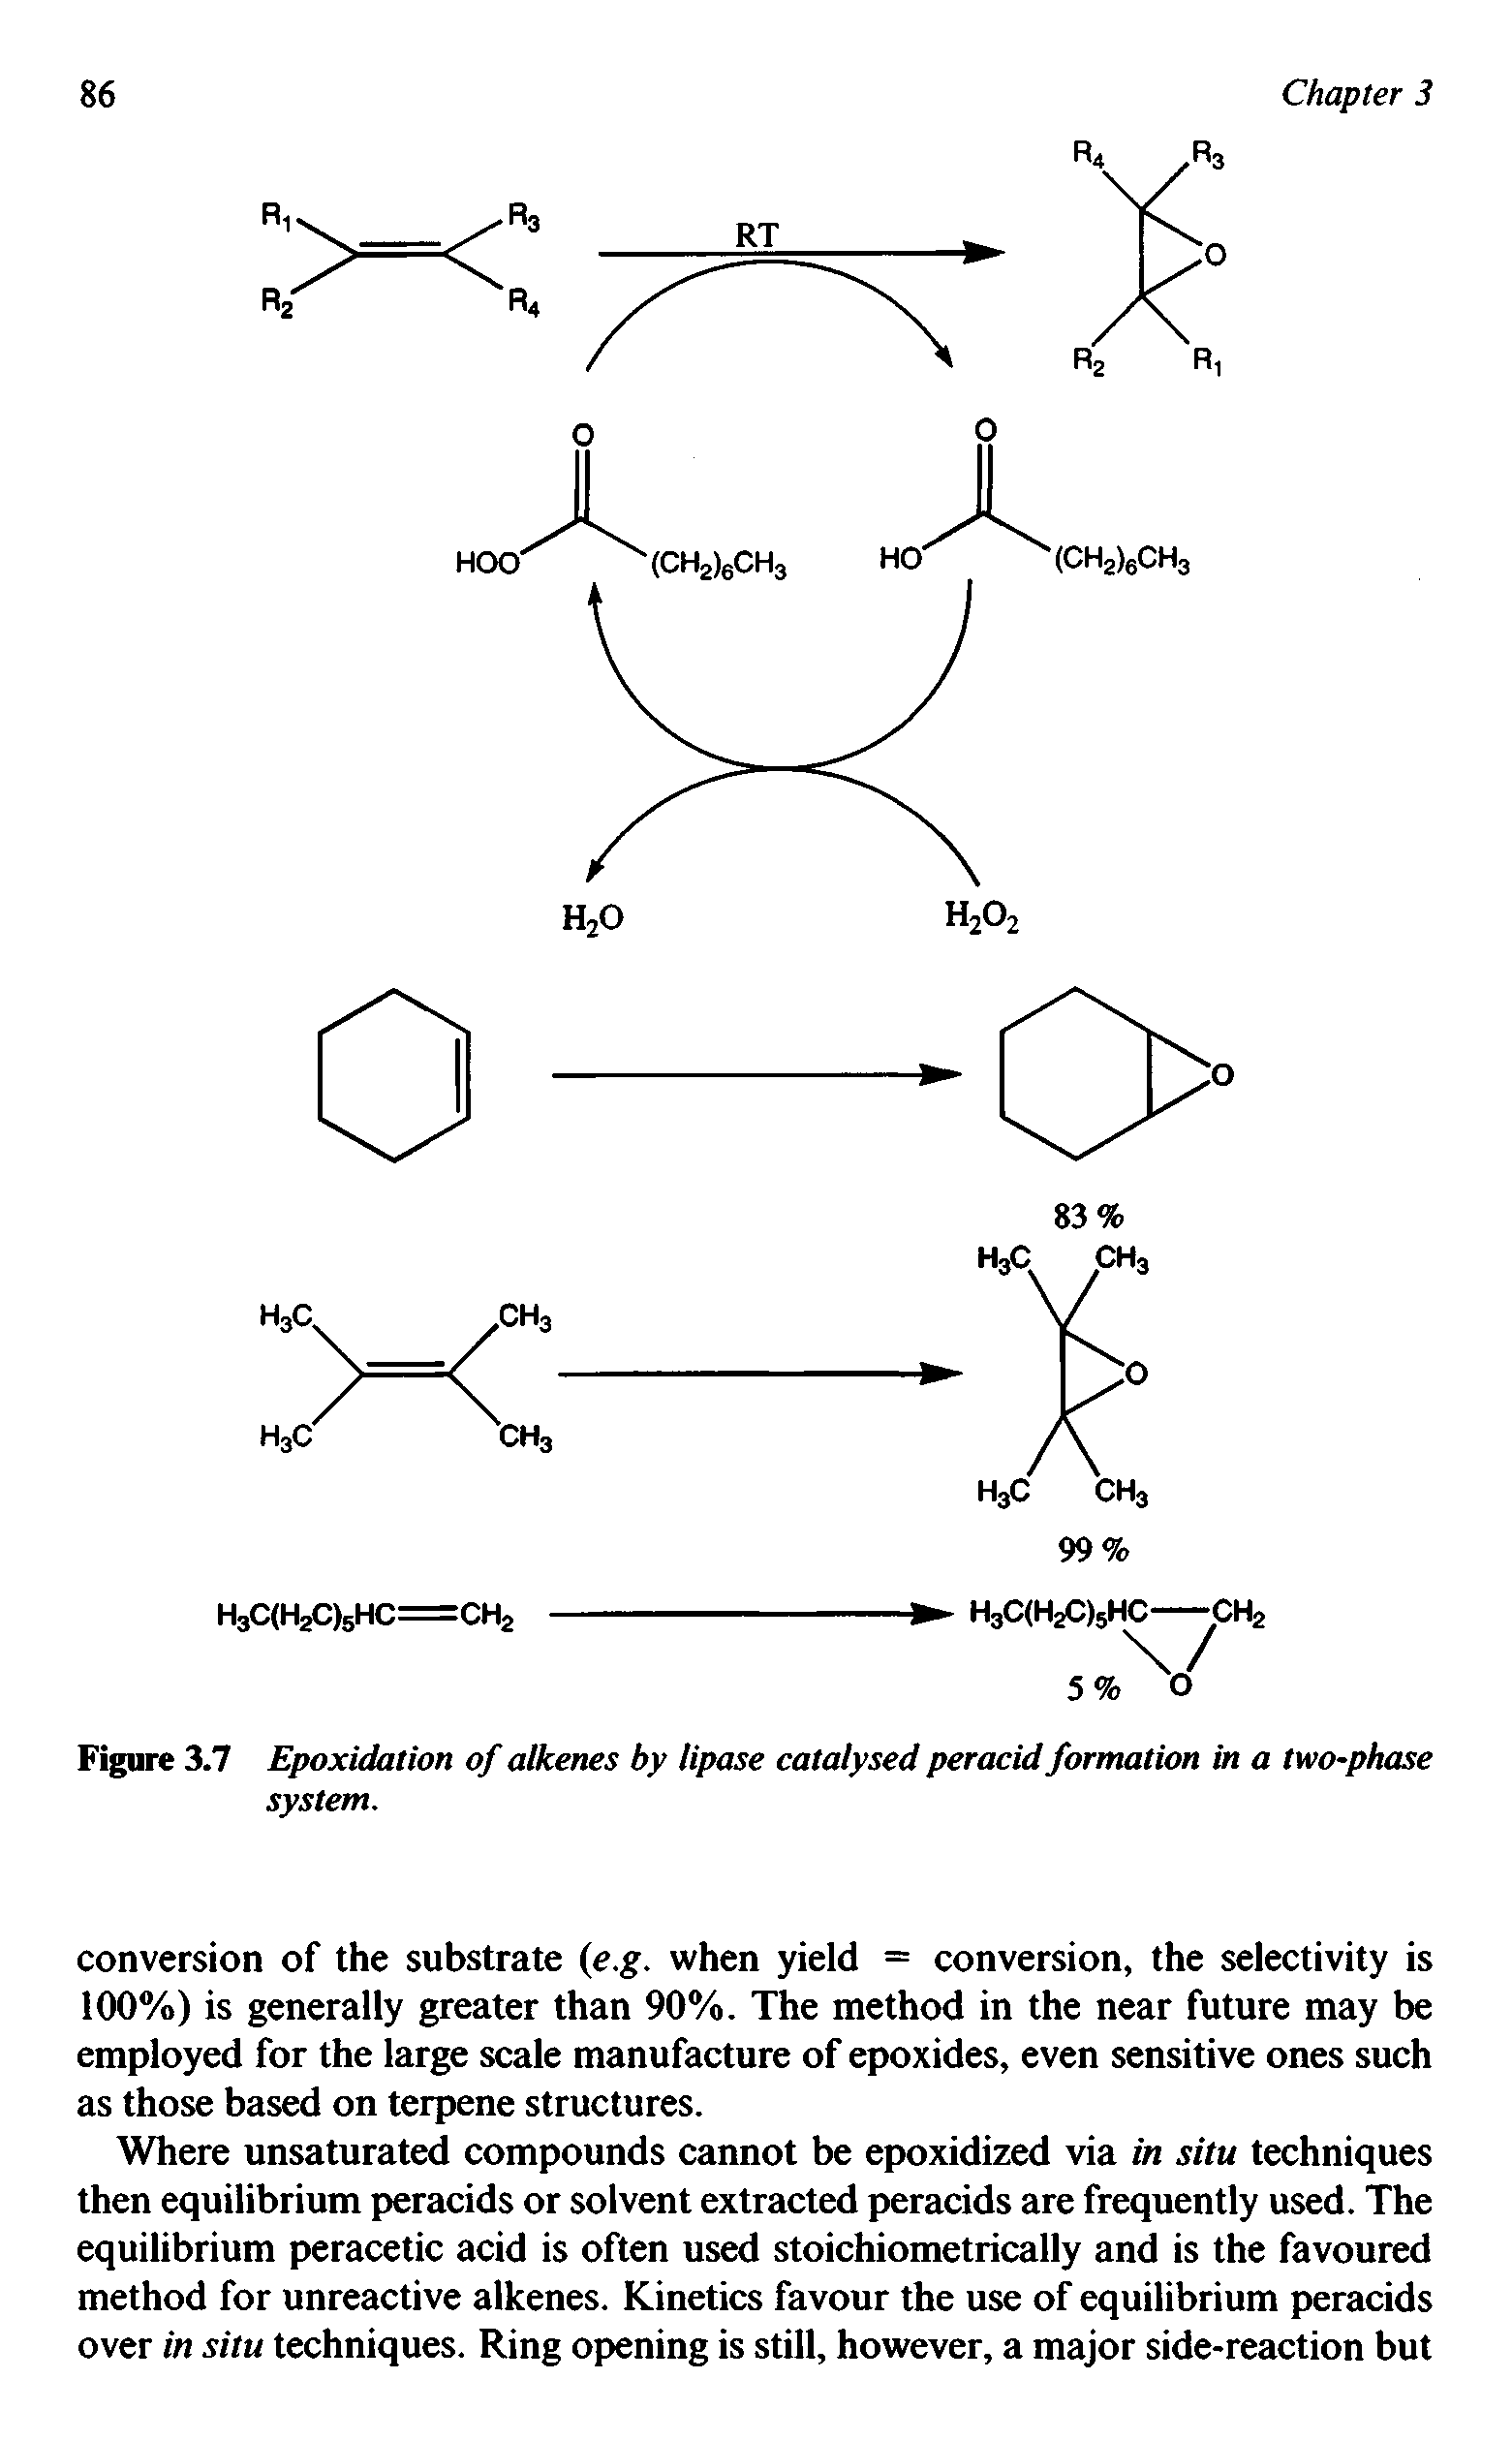 Figure 3.7 Epoxidation of alkenes by lipase catalysed peracid formation in a two-phase system.